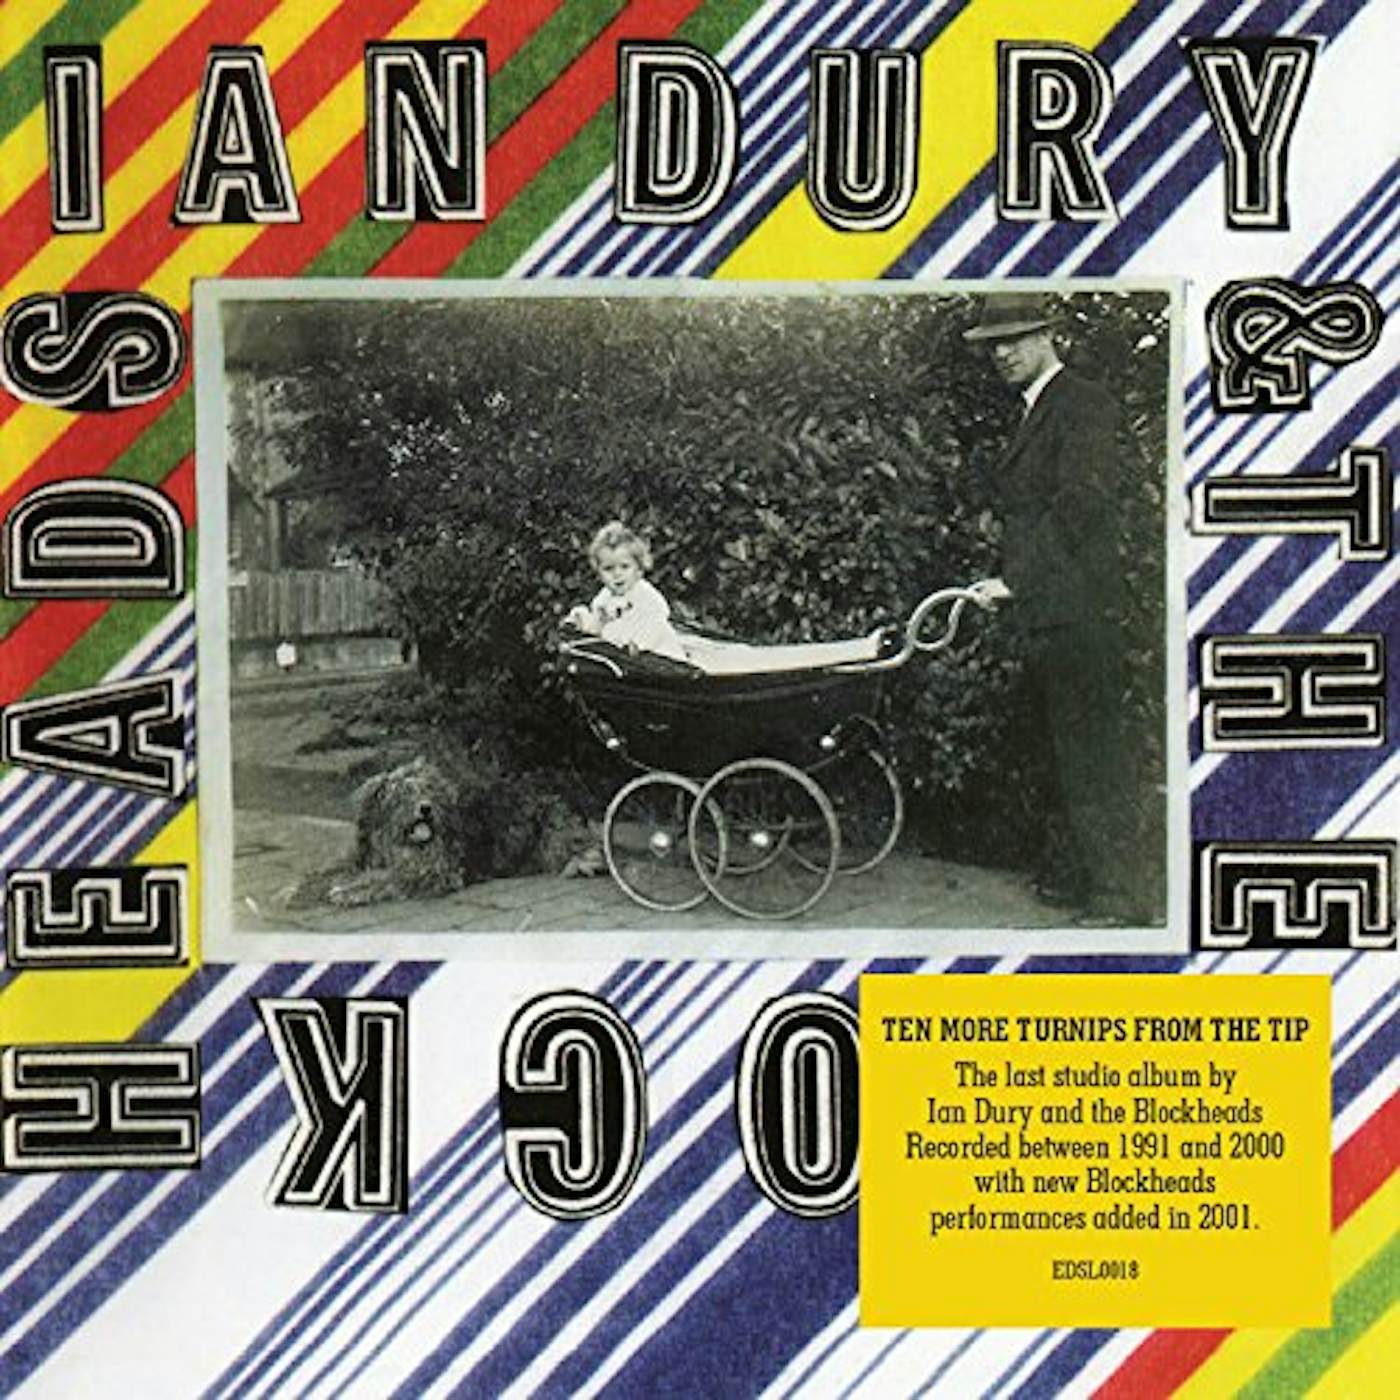 Ian Dury TEN MORE TURNIPS FROM THE TIP CD